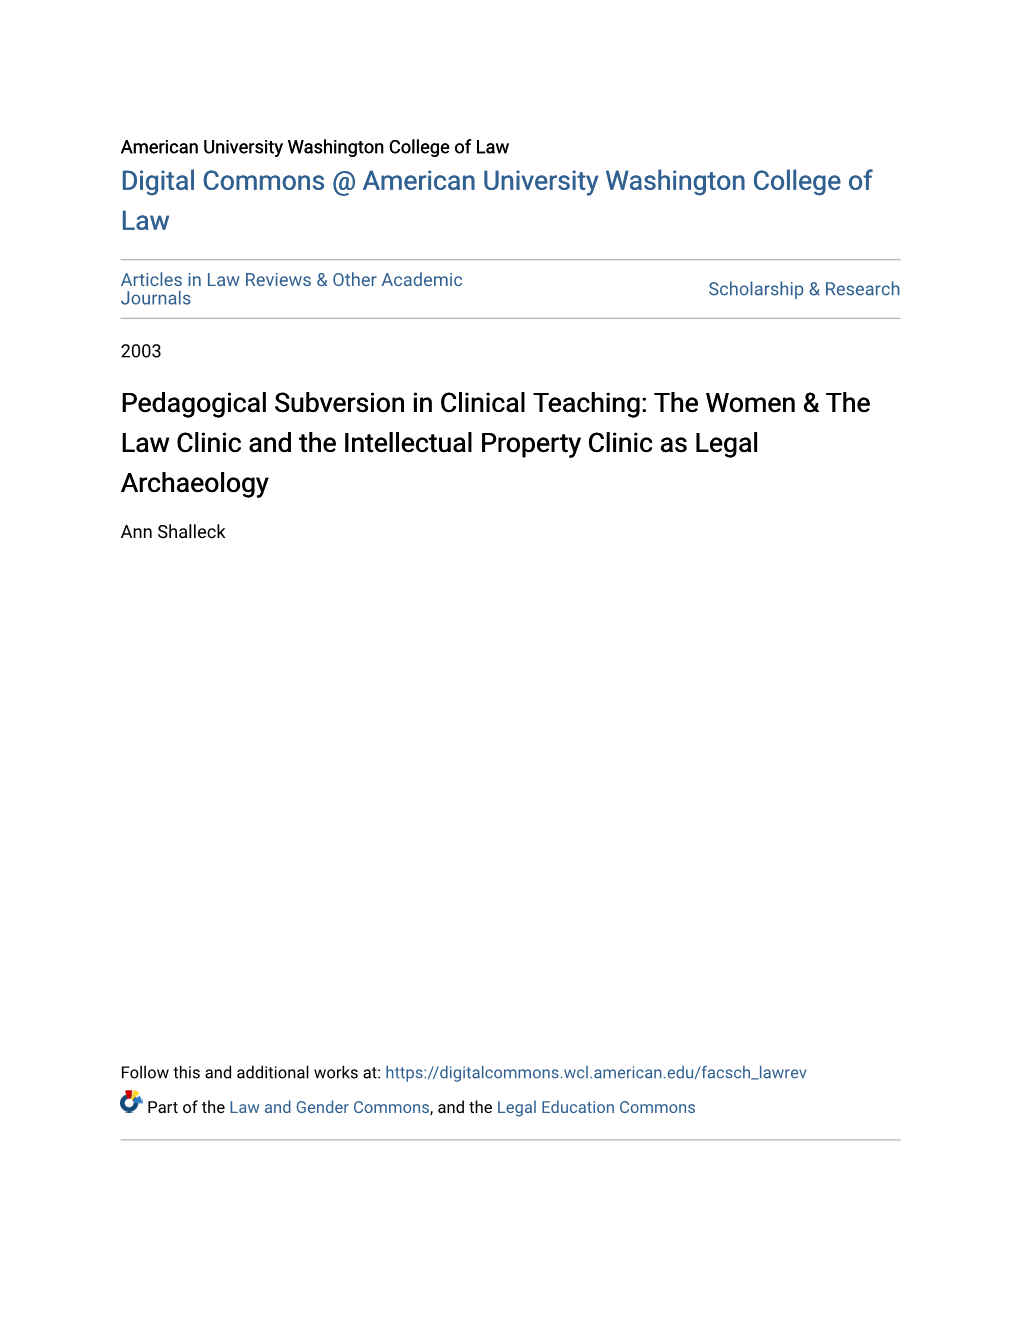 Pedagogical Subversion in Clinical Teaching: the Women & the Law